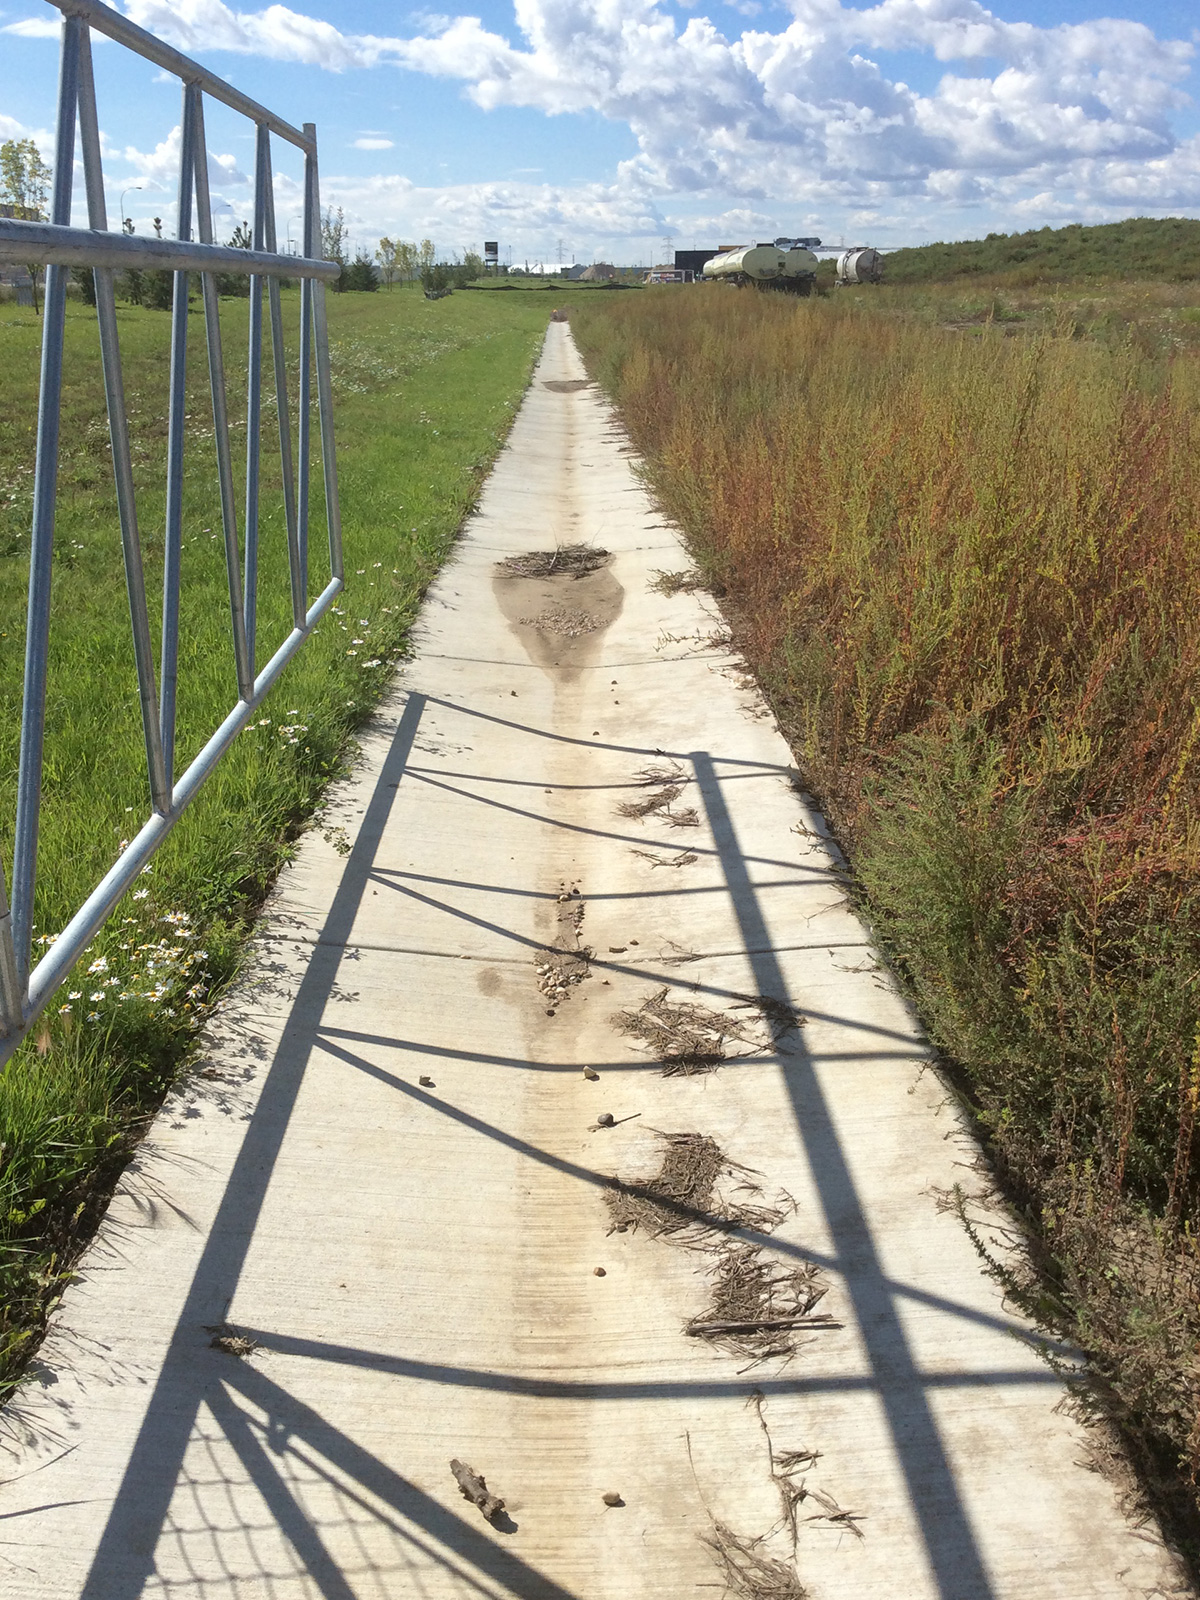 Concrete Swale on an Industrial Property